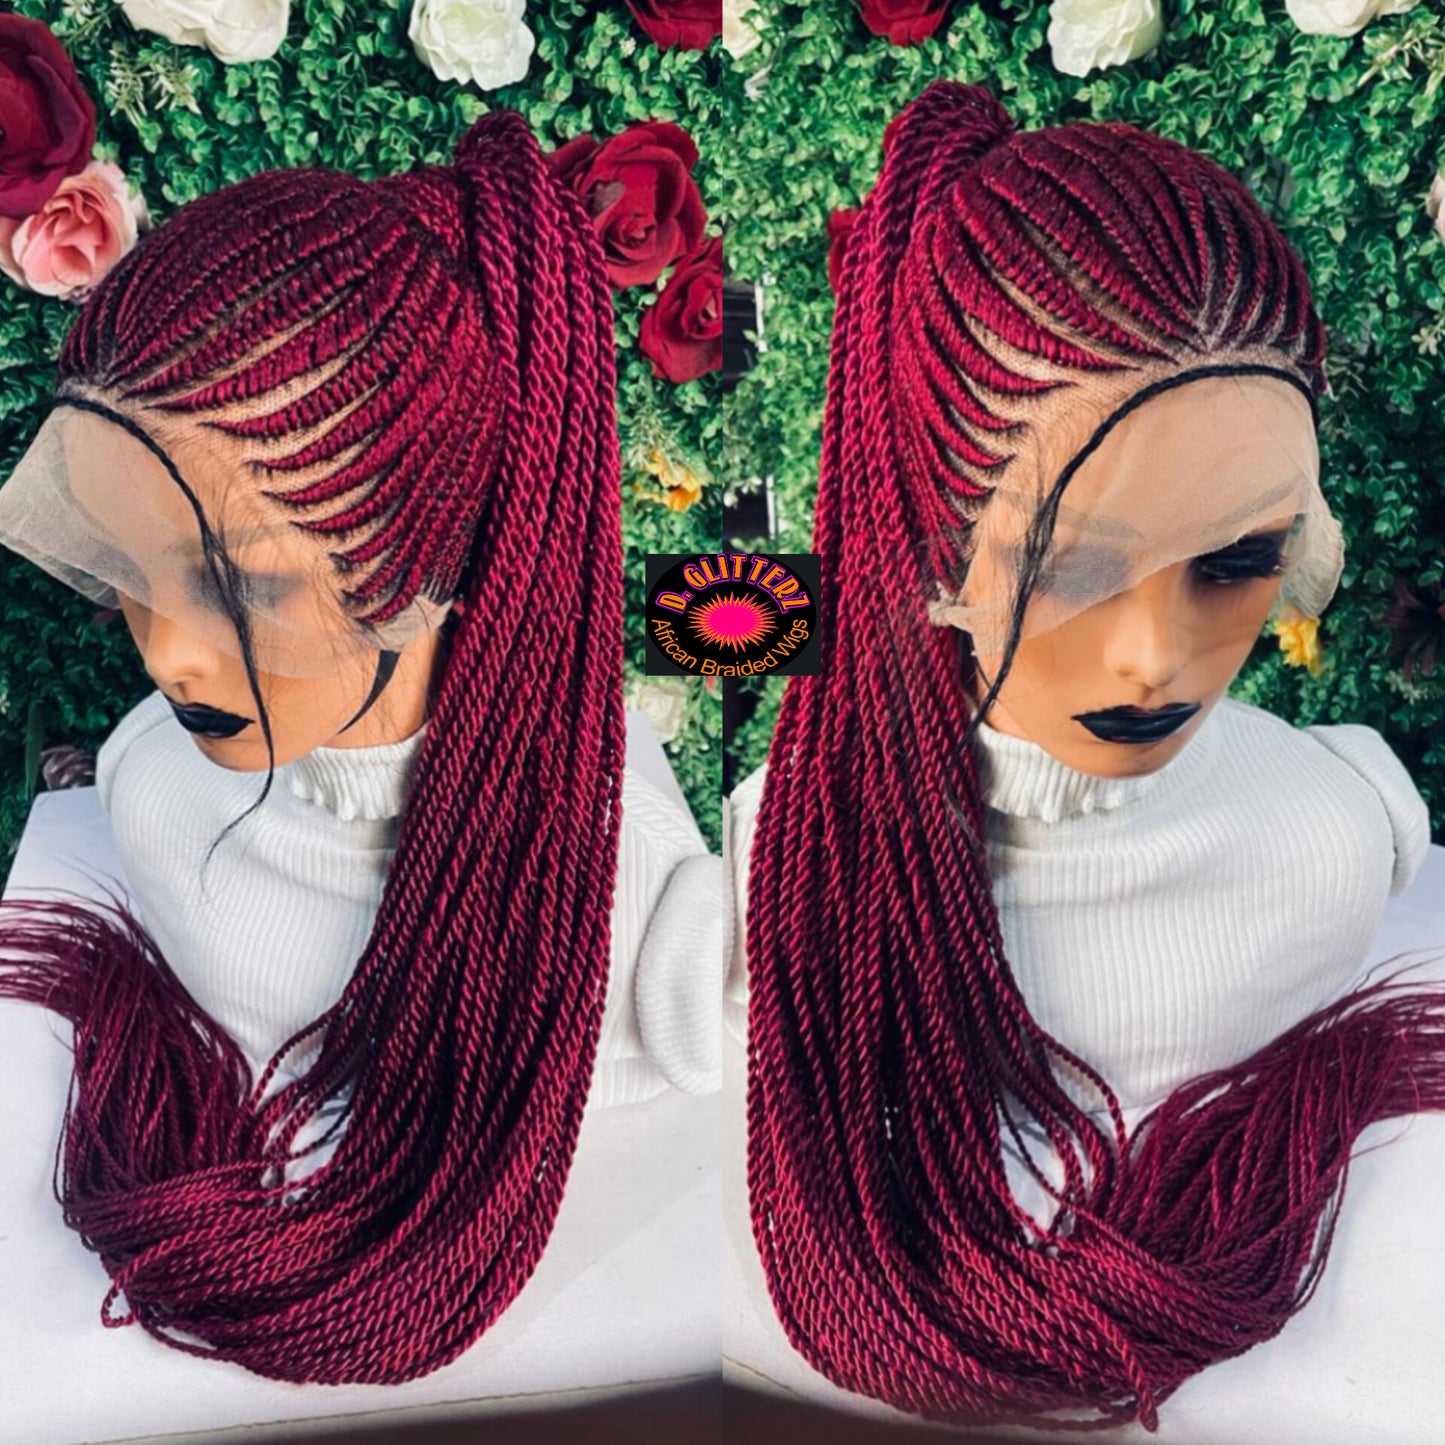 PONYTAIL BASKET  CONROW WIGS  ON  360 LACE CLOSURE